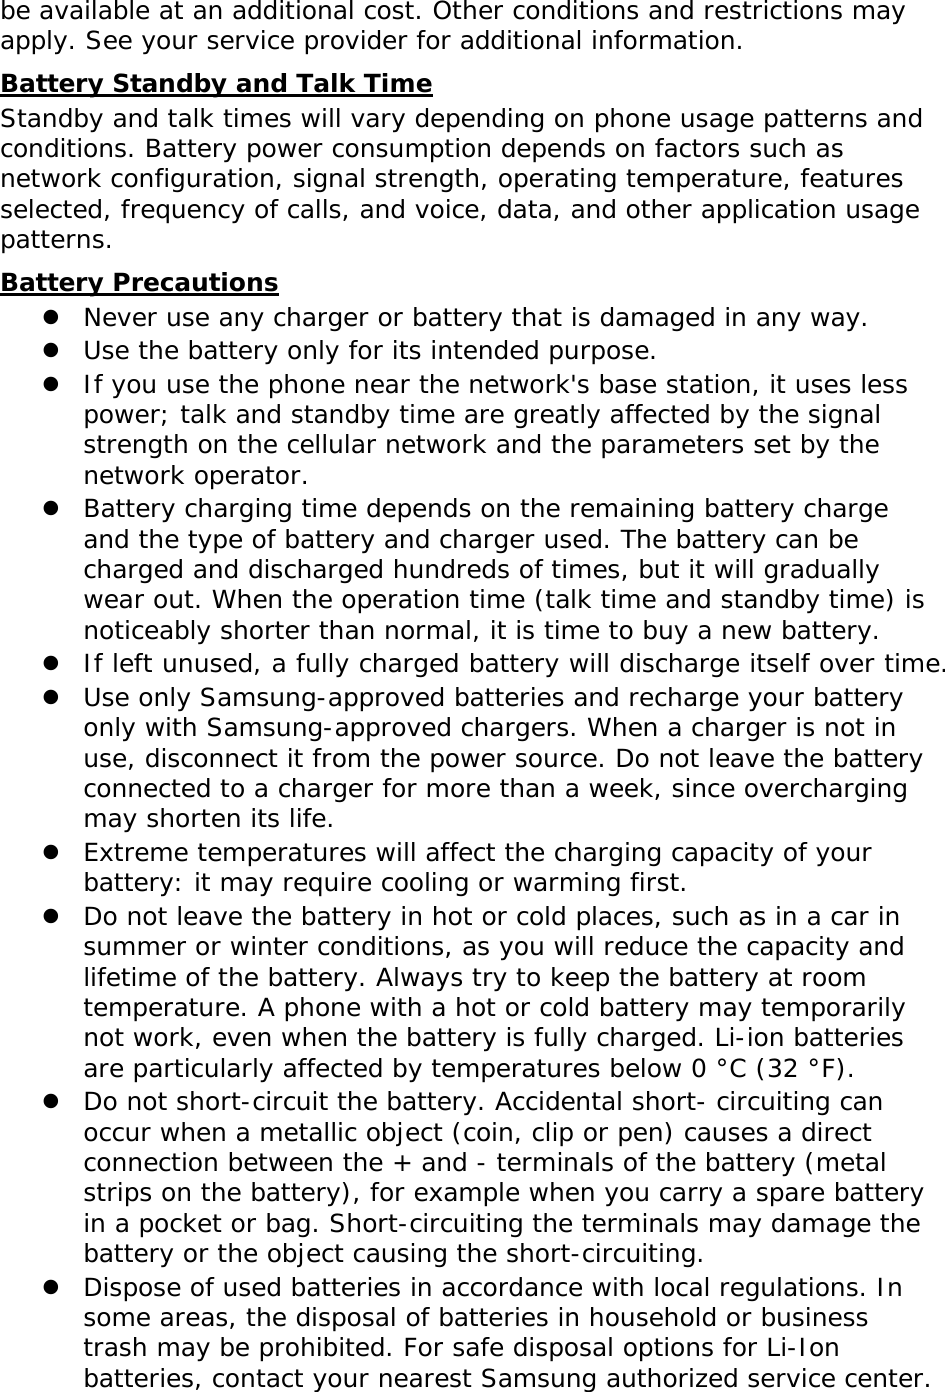 be available at an additional cost. Other conditions and restrictions may apply. See your service provider for additional information. Battery Standby and Talk Time Standby and talk times will vary depending on phone usage patterns and conditions. Battery power consumption depends on factors such as network configuration, signal strength, operating temperature, features selected, frequency of calls, and voice, data, and other application usage patterns.  Battery Precautions  Never use any charger or battery that is damaged in any way.  Use the battery only for its intended purpose.  If you use the phone near the network&apos;s base station, it uses less power; talk and standby time are greatly affected by the signal strength on the cellular network and the parameters set by the network operator.  Battery charging time depends on the remaining battery charge and the type of battery and charger used. The battery can be charged and discharged hundreds of times, but it will gradually wear out. When the operation time (talk time and standby time) is noticeably shorter than normal, it is time to buy a new battery.  If left unused, a fully charged battery will discharge itself over time.  Use only Samsung-approved batteries and recharge your battery only with Samsung-approved chargers. When a charger is not in use, disconnect it from the power source. Do not leave the battery connected to a charger for more than a week, since overcharging may shorten its life.  Extreme temperatures will affect the charging capacity of your battery: it may require cooling or warming first.  Do not leave the battery in hot or cold places, such as in a car in summer or winter conditions, as you will reduce the capacity and lifetime of the battery. Always try to keep the battery at room temperature. A phone with a hot or cold battery may temporarily not work, even when the battery is fully charged. Li-ion batteries are particularly affected by temperatures below 0 °C (32 °F).  Do not short-circuit the battery. Accidental short- circuiting can occur when a metallic object (coin, clip or pen) causes a direct connection between the + and - terminals of the battery (metal strips on the battery), for example when you carry a spare battery in a pocket or bag. Short-circuiting the terminals may damage the battery or the object causing the short-circuiting.  Dispose of used batteries in accordance with local regulations. In some areas, the disposal of batteries in household or business trash may be prohibited. For safe disposal options for Li-Ion batteries, contact your nearest Samsung authorized service center. 